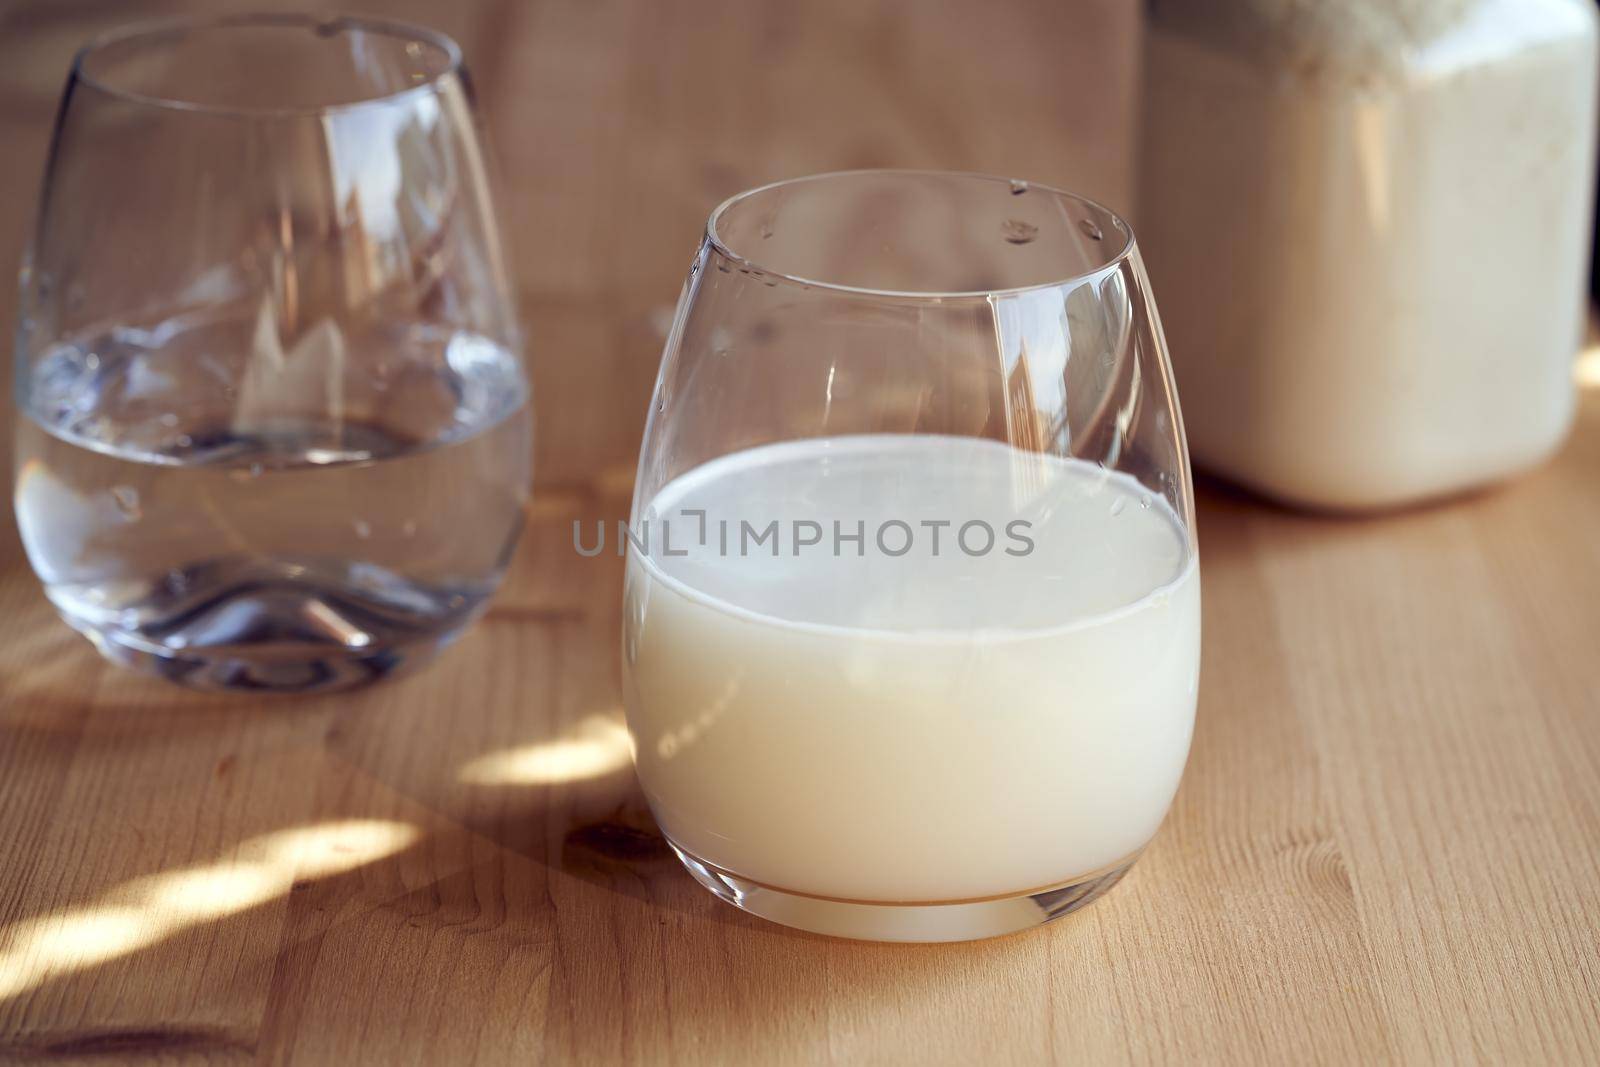 A glass of healthy drink made from whey protein powder